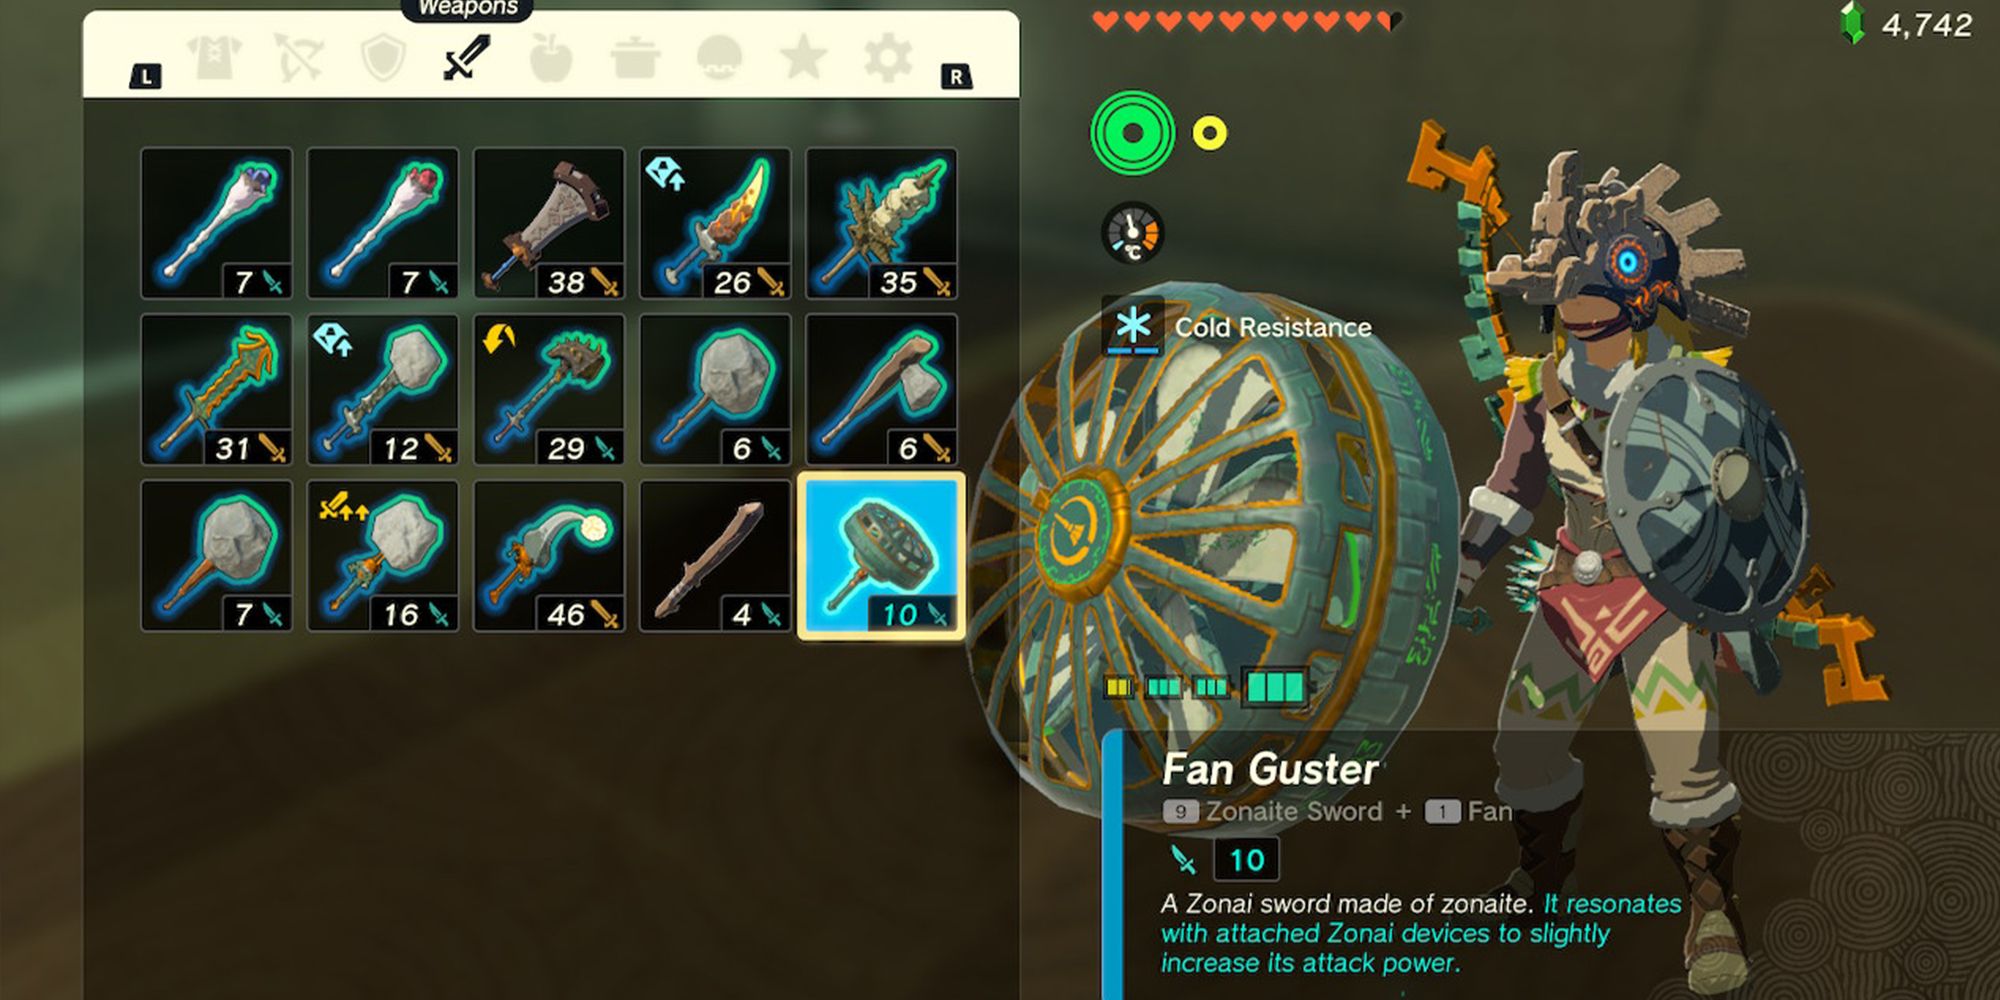 Link with Fan Guster